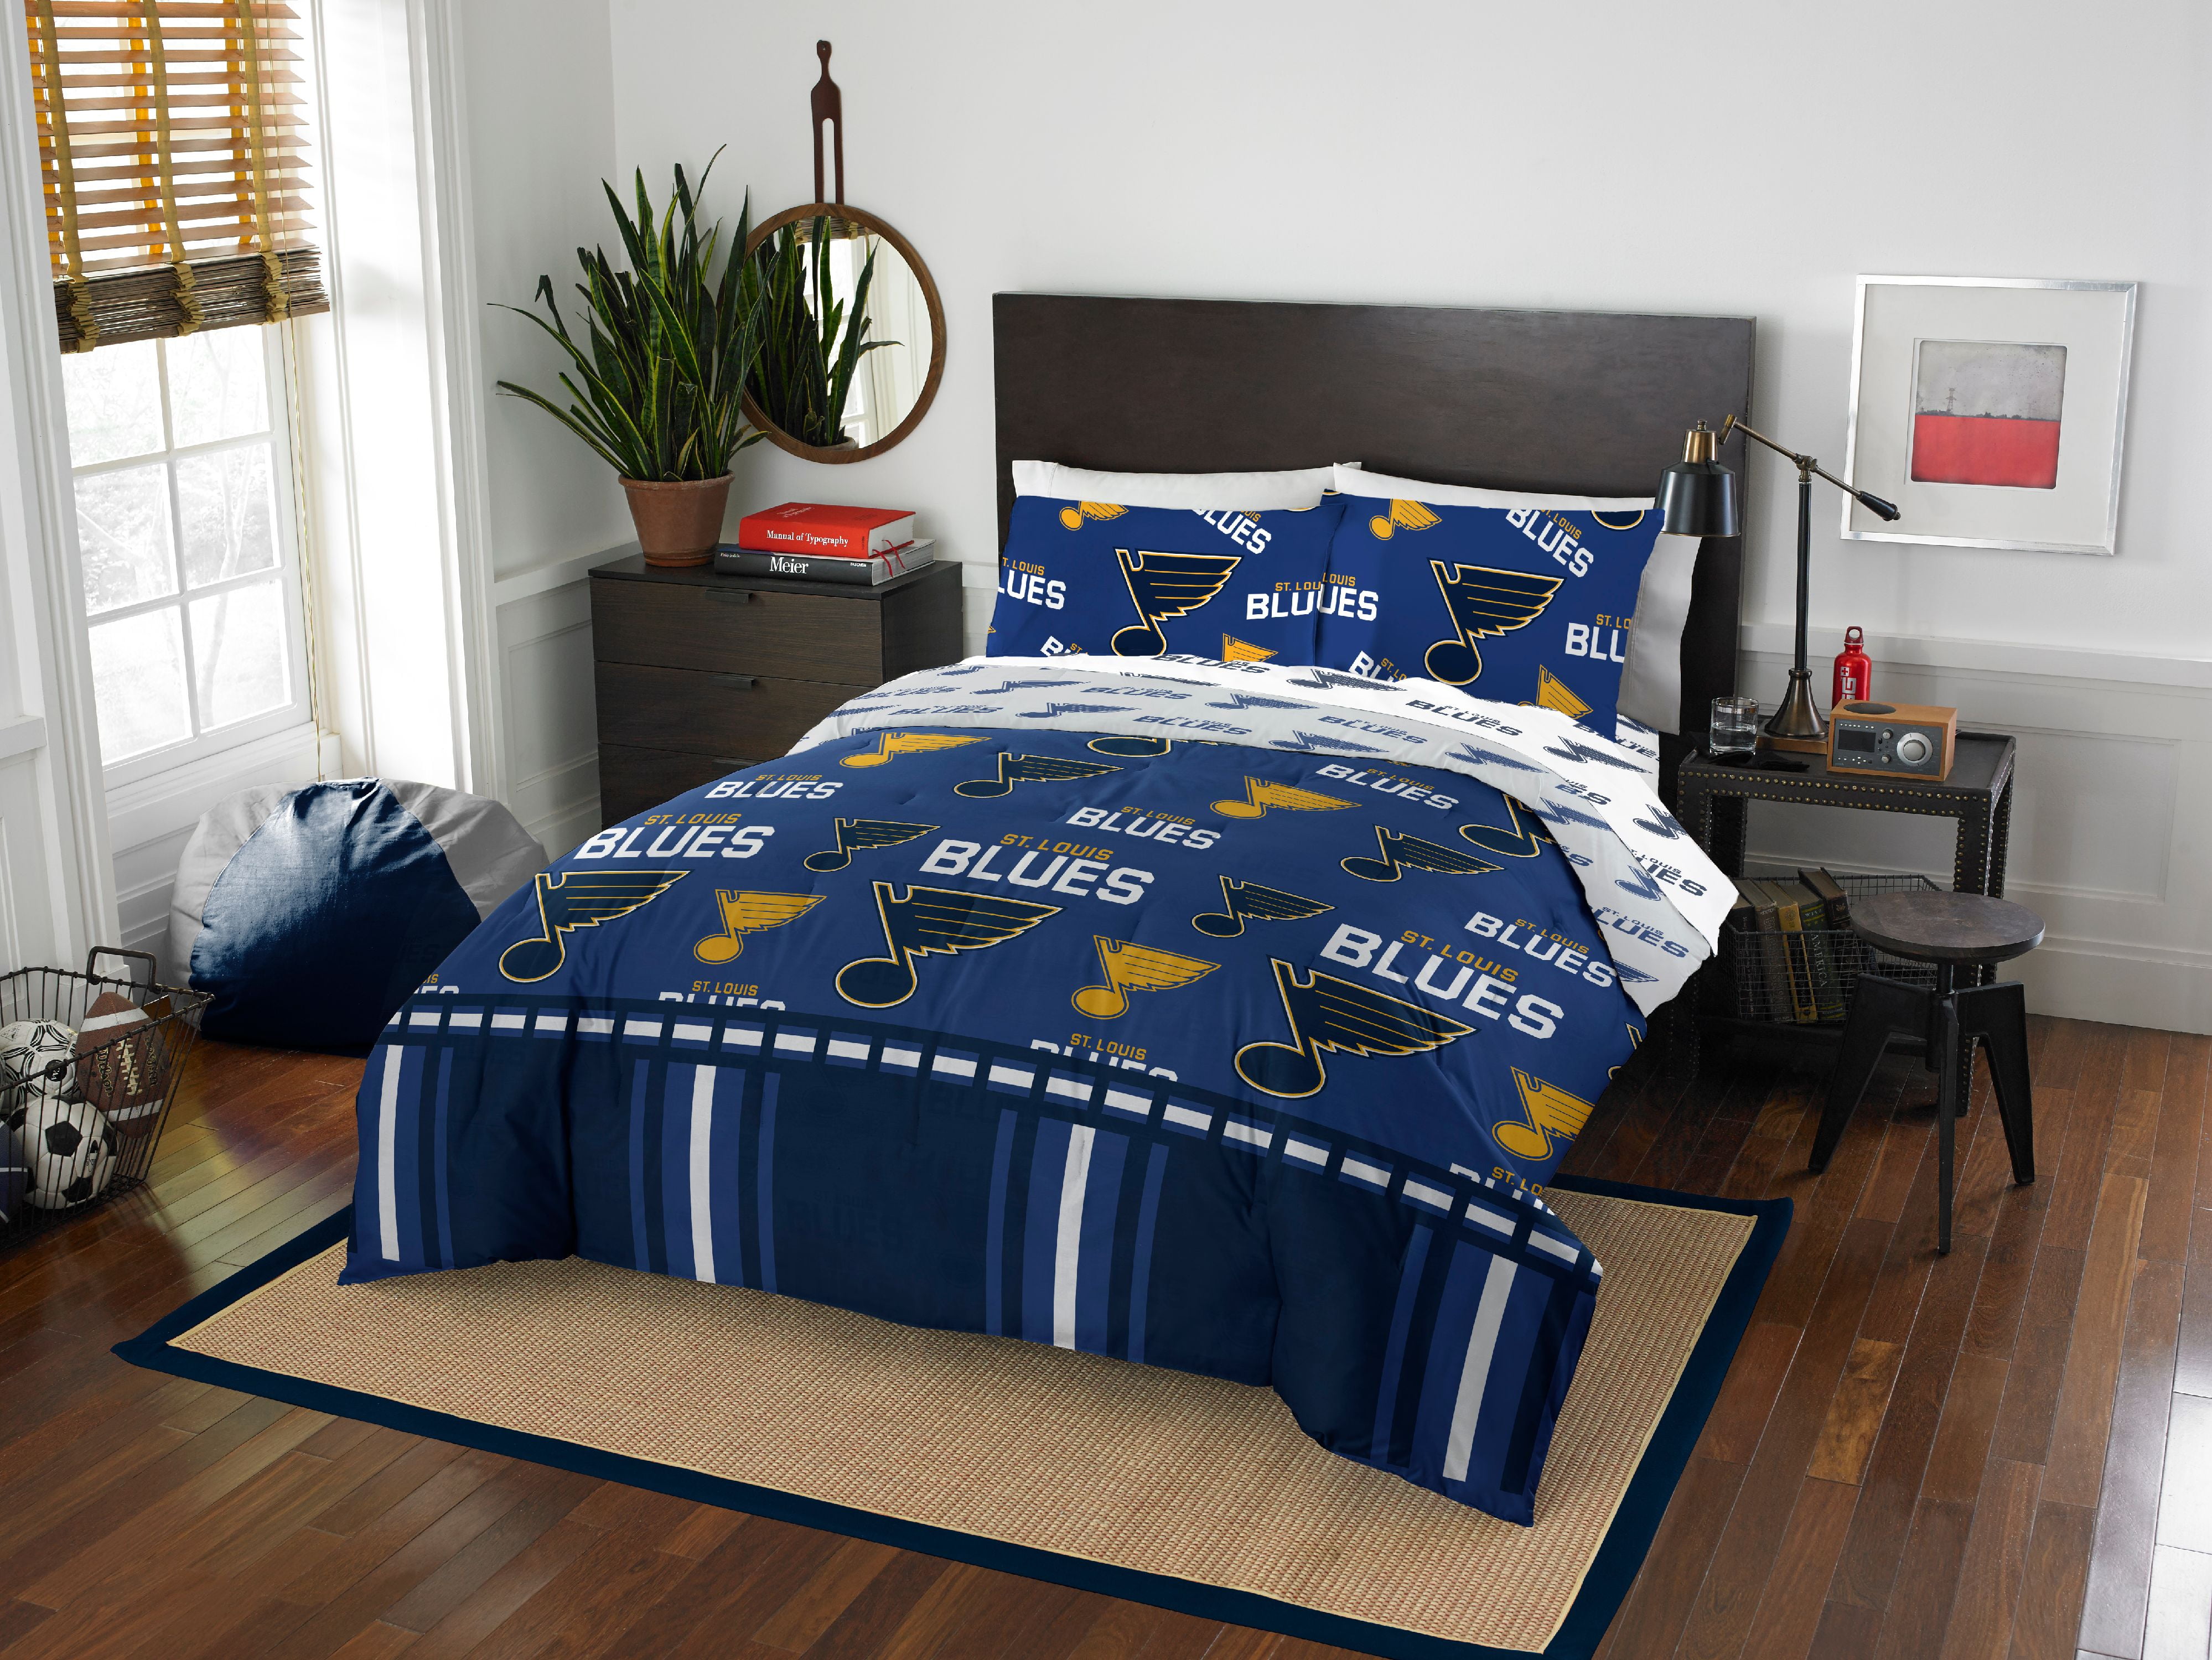 Performance Bedding Partner of the St. LouisBlues.